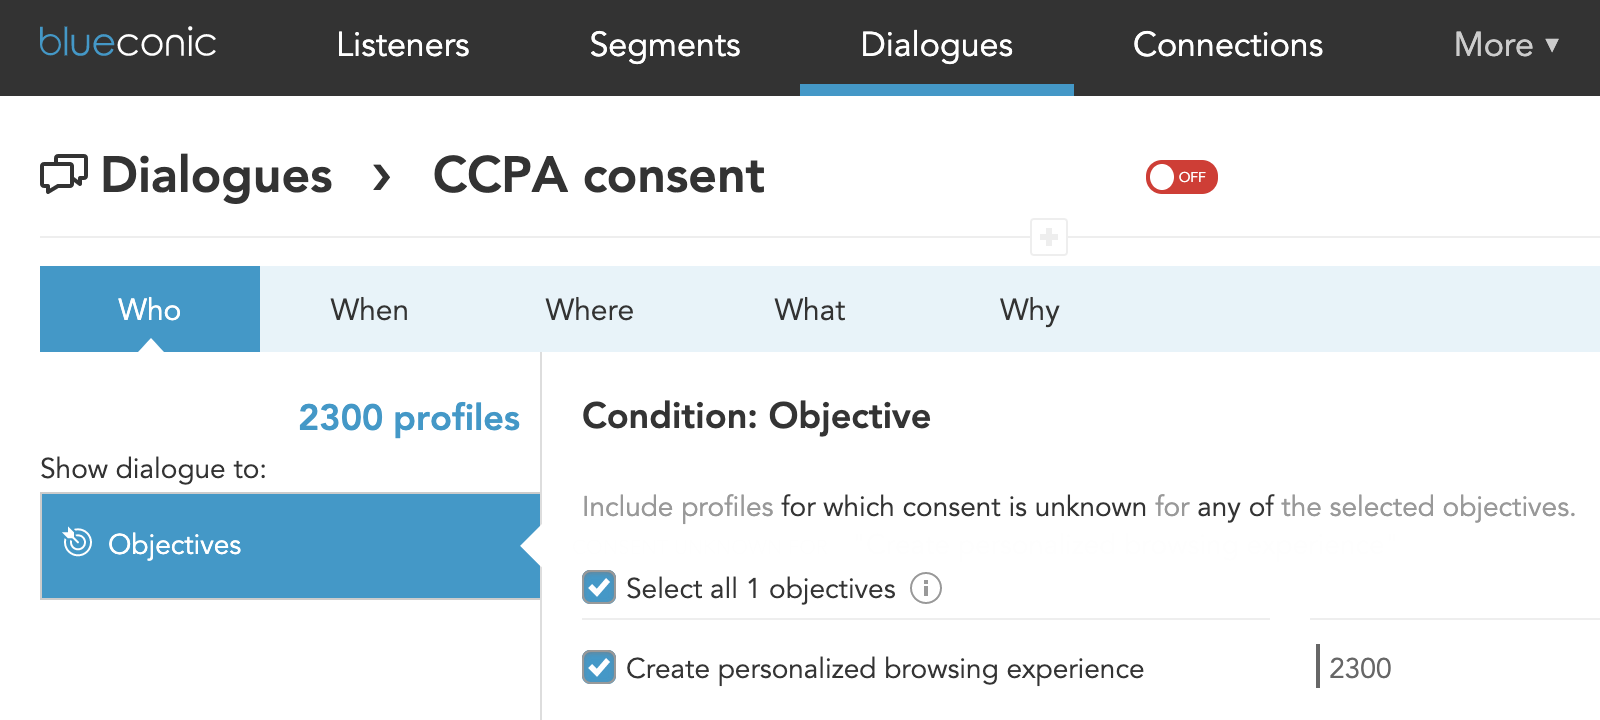 How do I ensure CCPA consent compliance using a CDP like BlueConic?